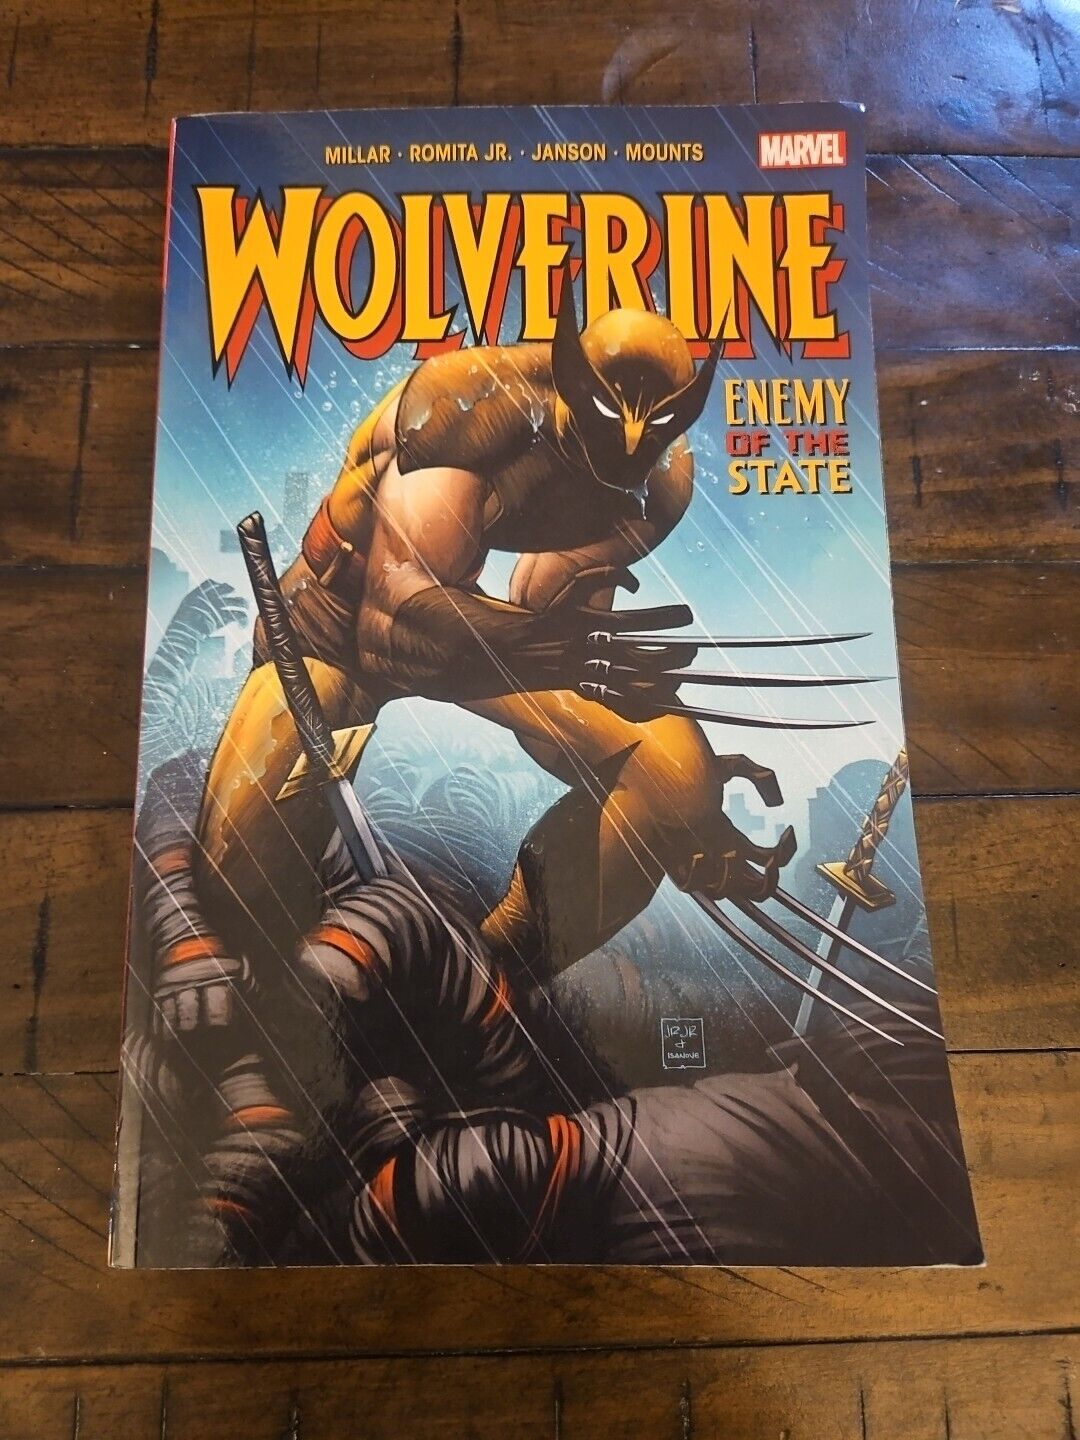 Wolverine: Enemy of the State by Mark Millar (2020, Trade Paperback)